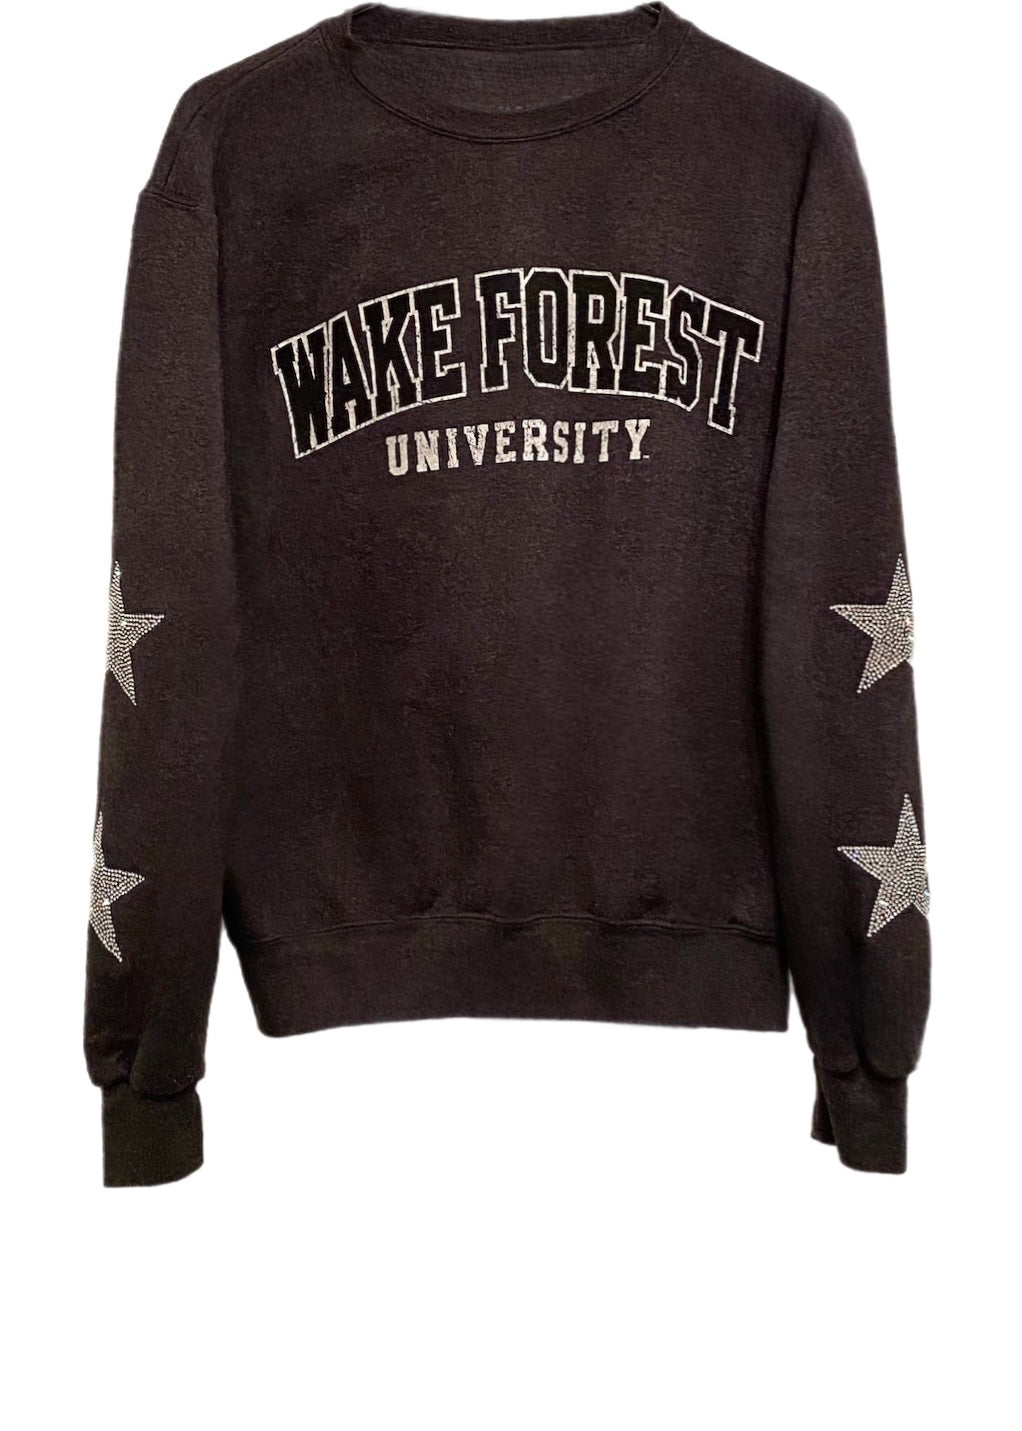 Wake Forest University, One of a KIND Vintage Sweatshirt with Crystal Star Design